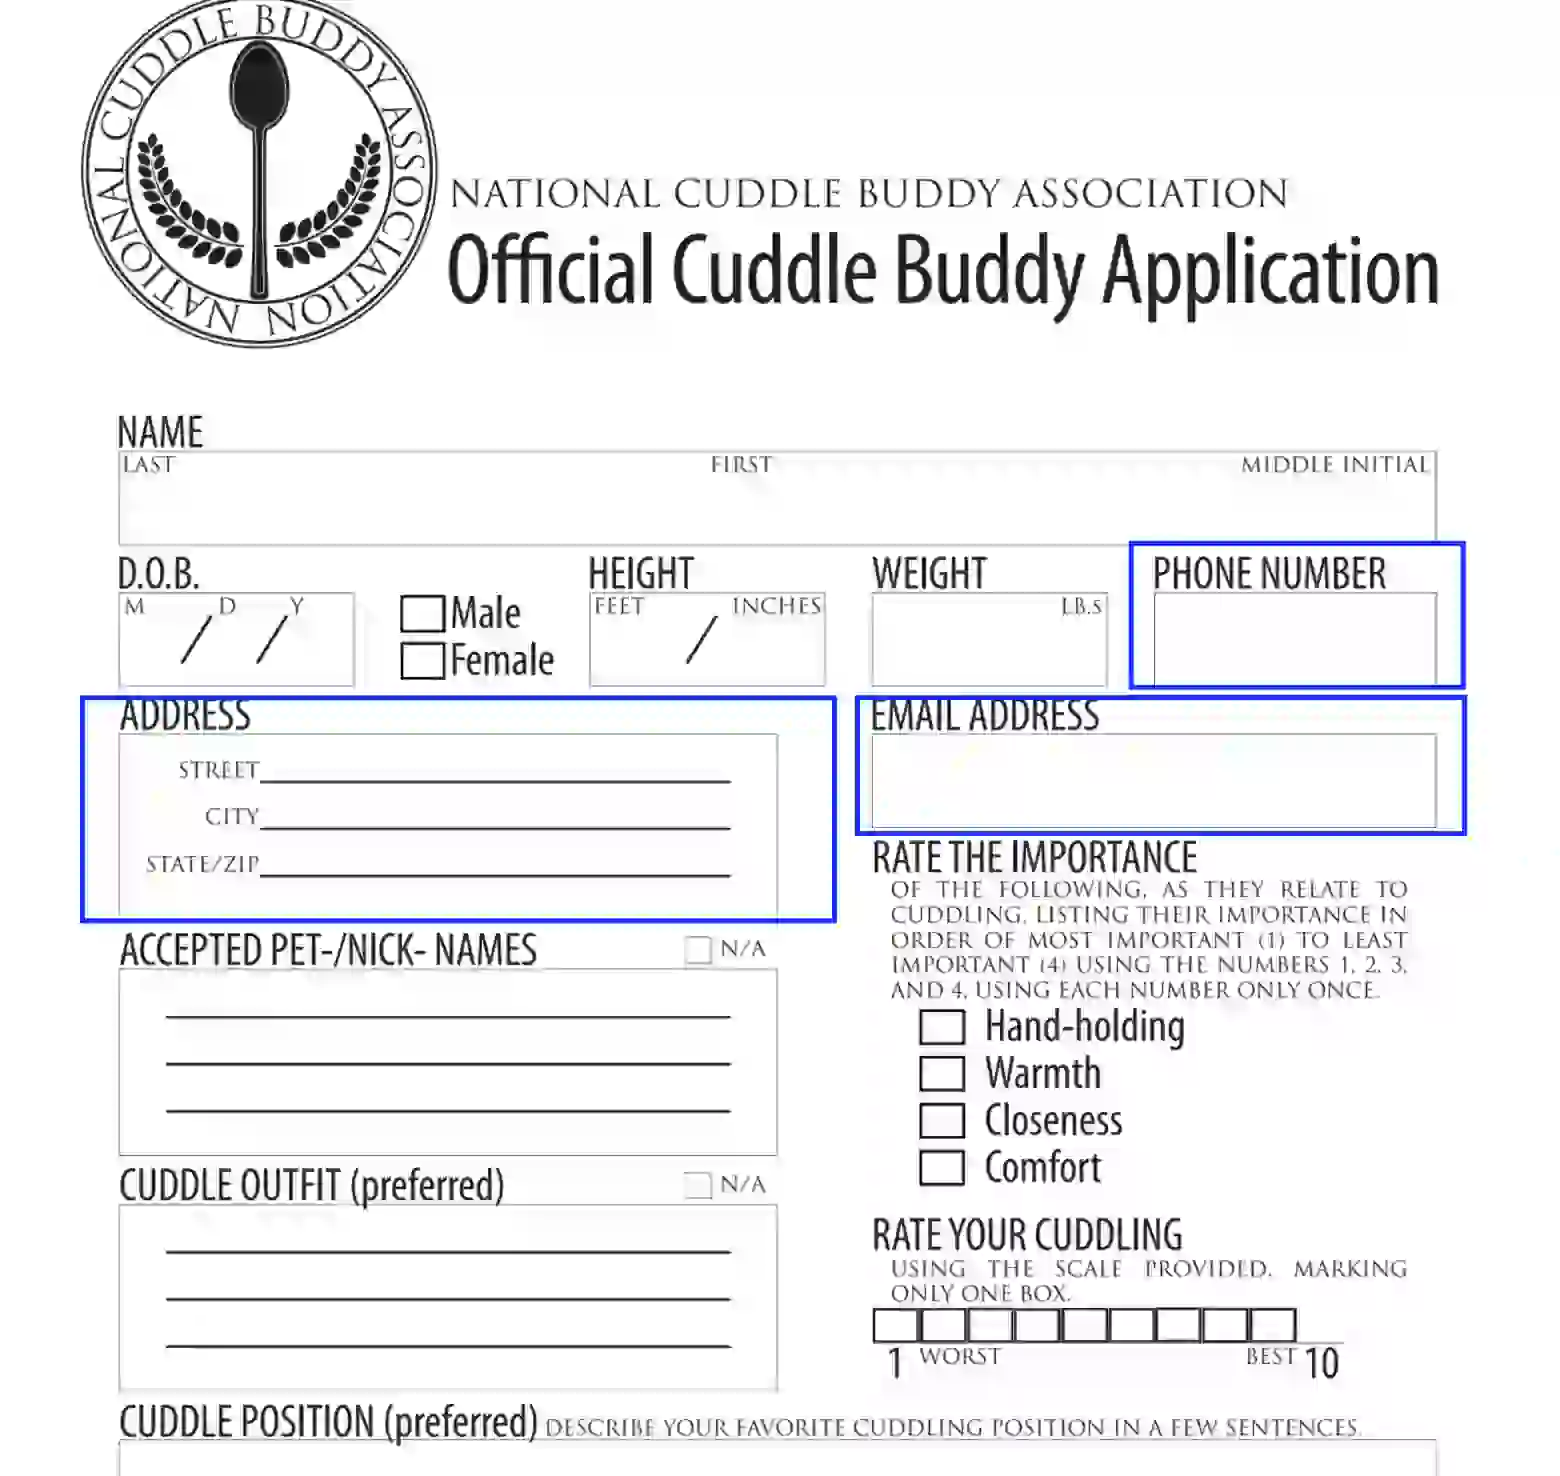 Cuddle Buddy Application Form Not Filled Out